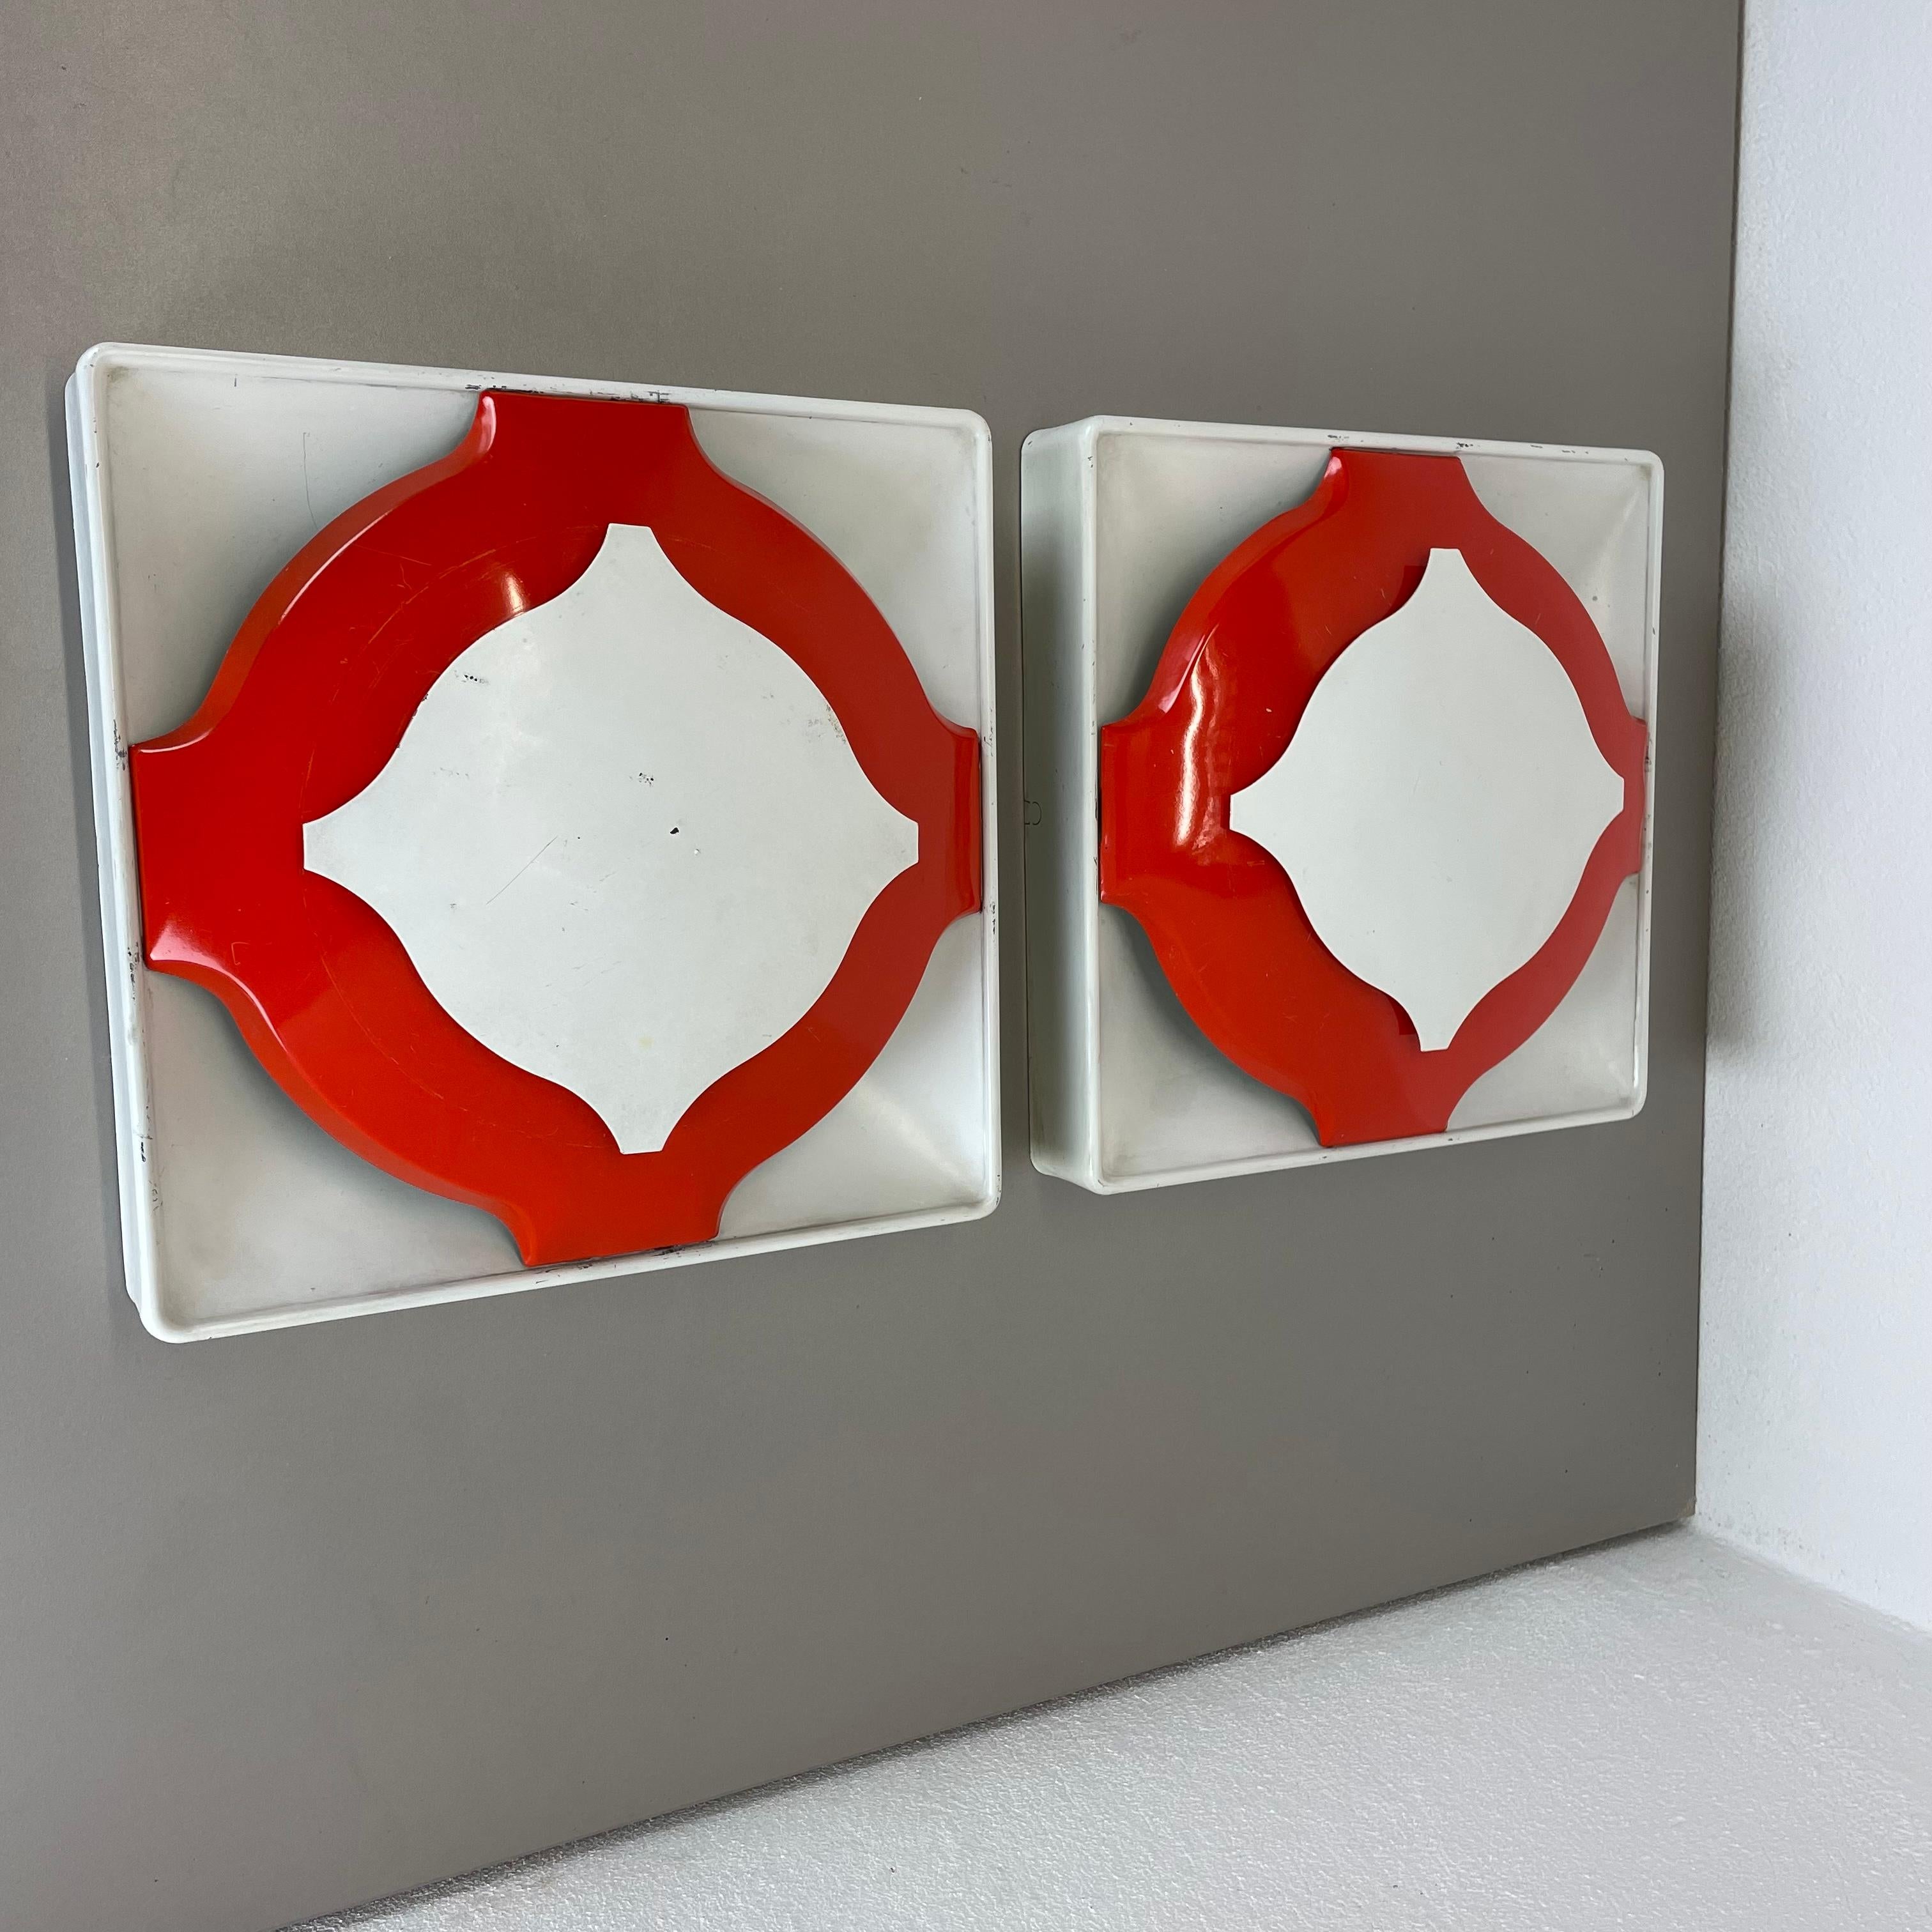 Article:

Wall light set of 2


Producer:

Sölken Lights, Germany


Origin:

Germany



Age:

1970s



Set of 2 original white and red wall light designed and produced by Sölken Leuchten in Germany in the 1970s. Thisset is made